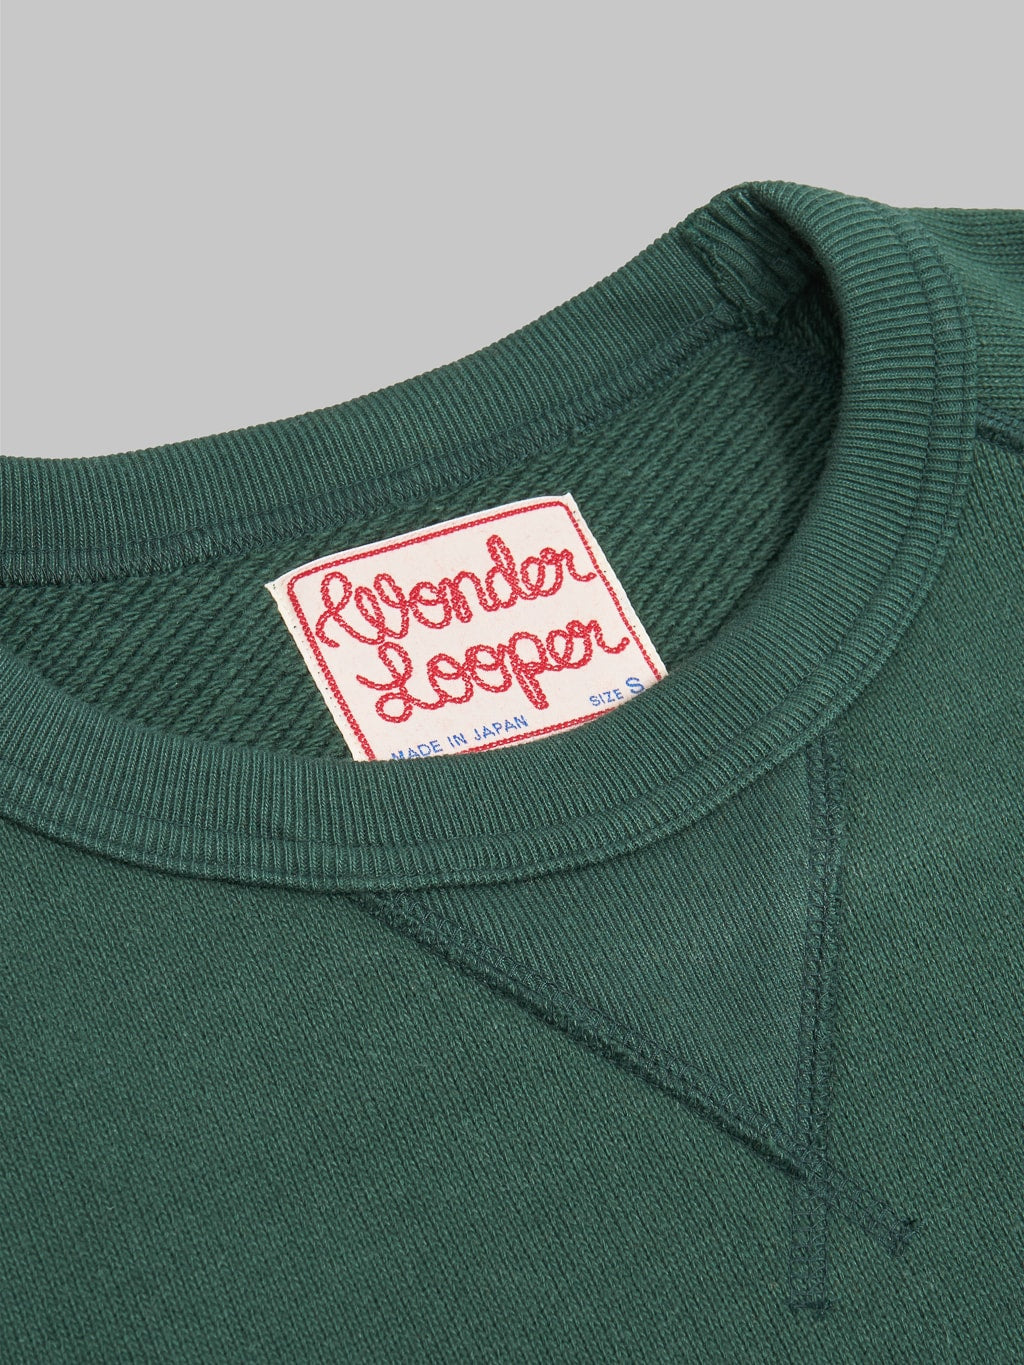 Wonder Looper Pullover Crewneck 701gsm Double Heavyweight French Terry Green brand details